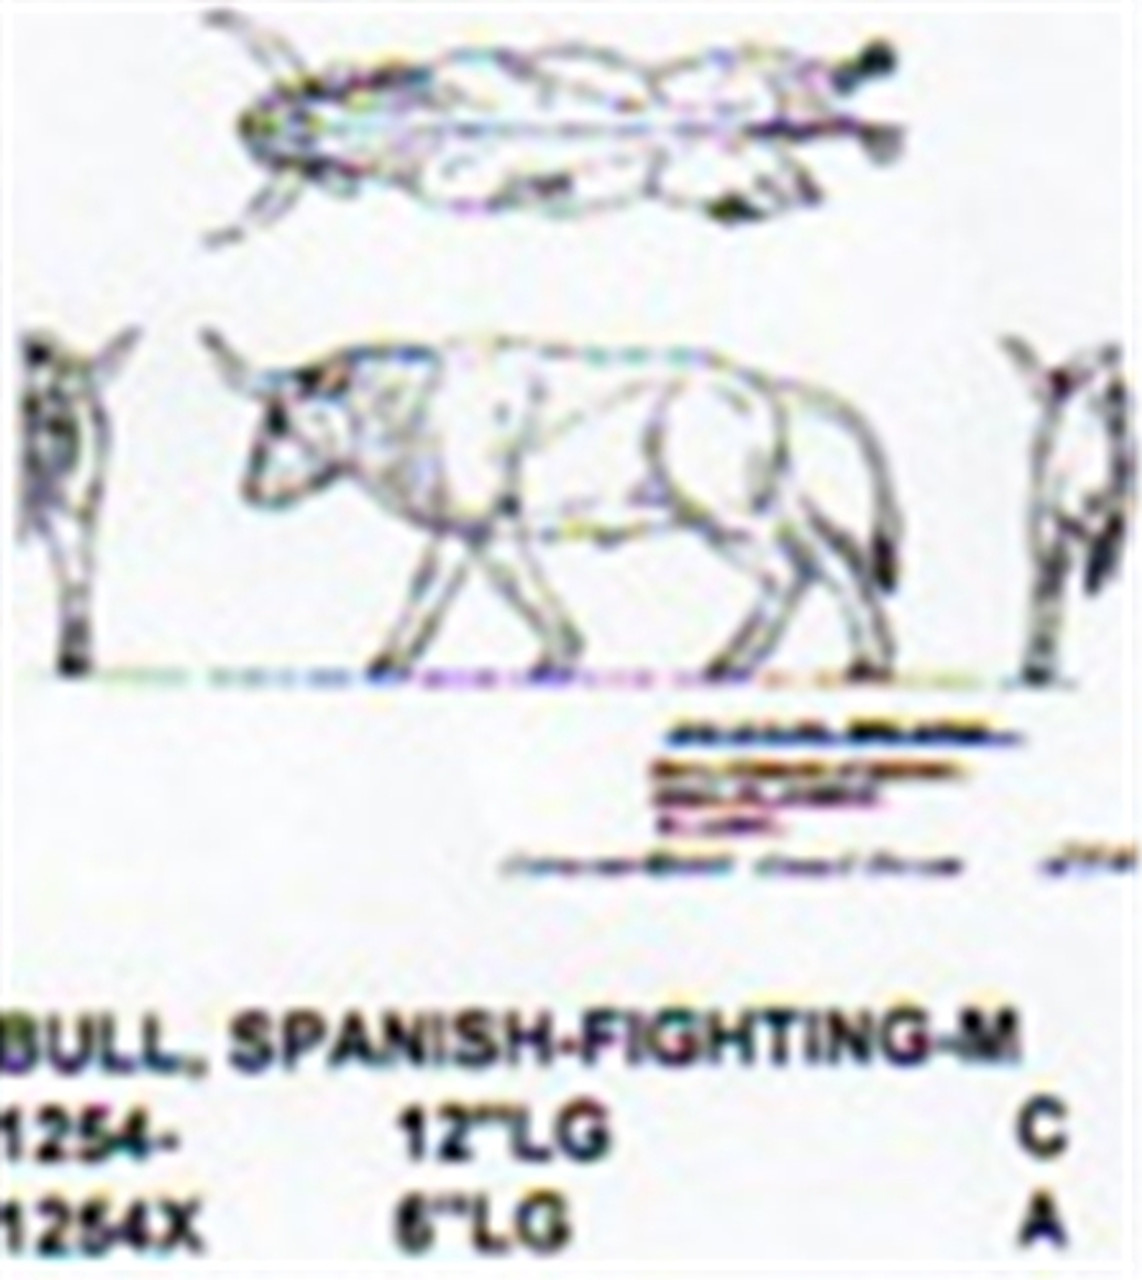 Spanish-Fighting Bull Ready to Charge 12" Long